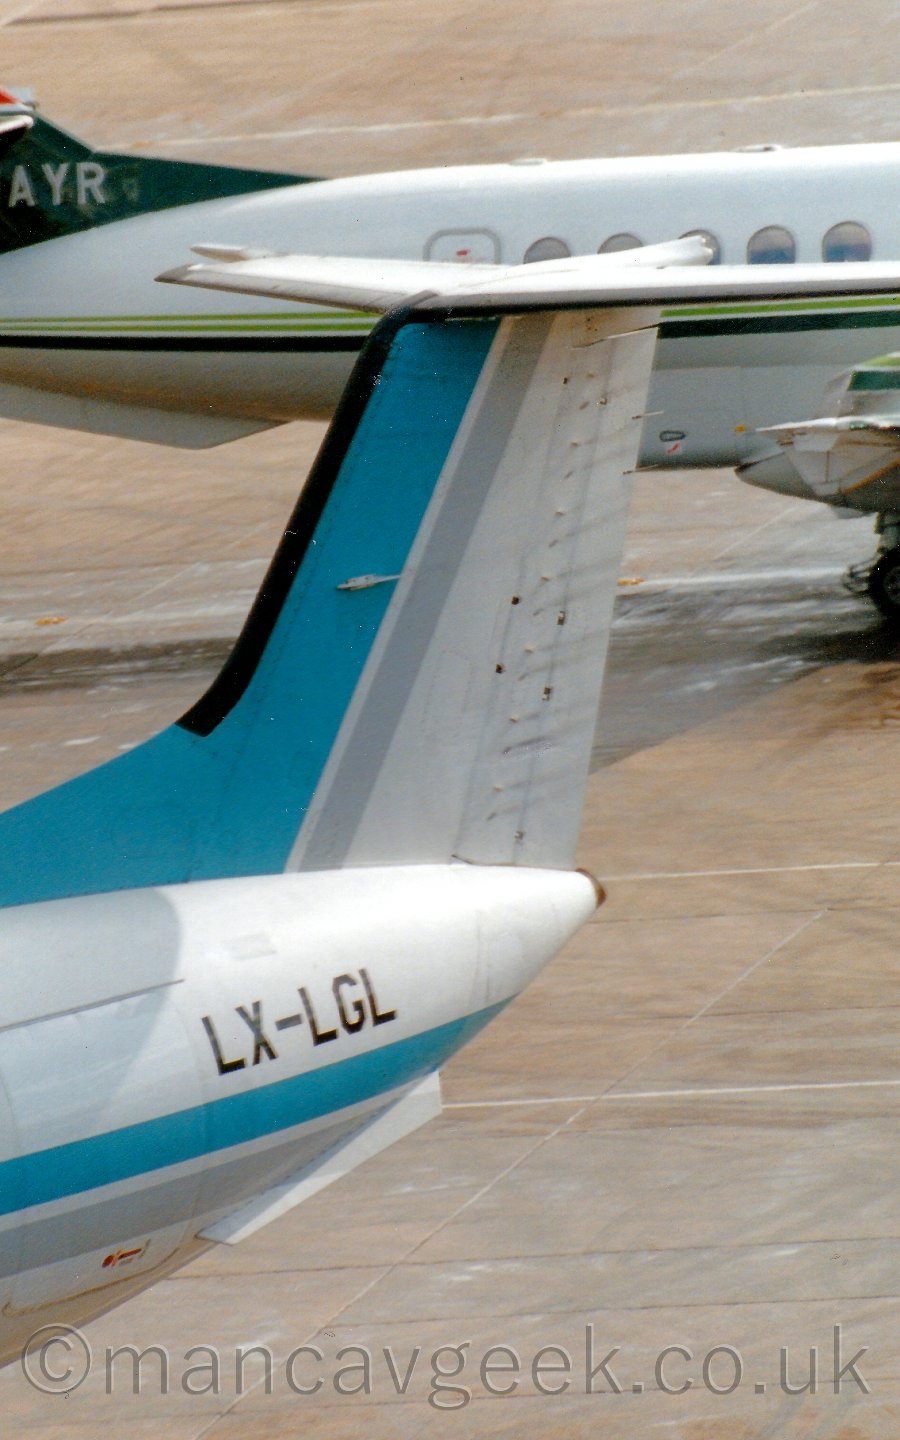 Closeup of the white and blue tail of an airliner taxiing towards the bottom left corner of the frame, with rear fuselage of a white and green plane in the background.